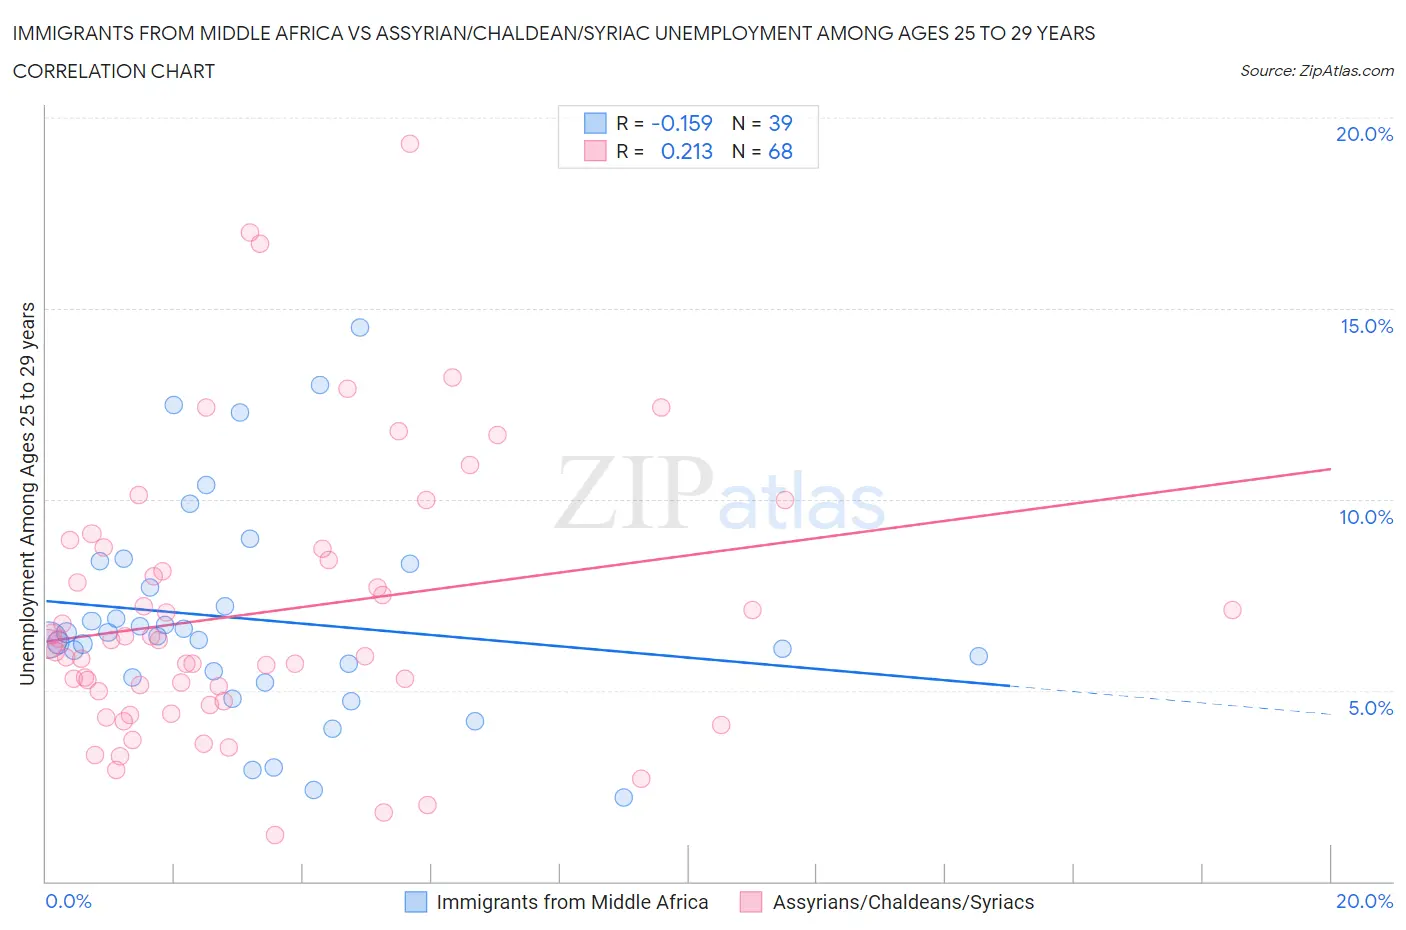 Immigrants from Middle Africa vs Assyrian/Chaldean/Syriac Unemployment Among Ages 25 to 29 years